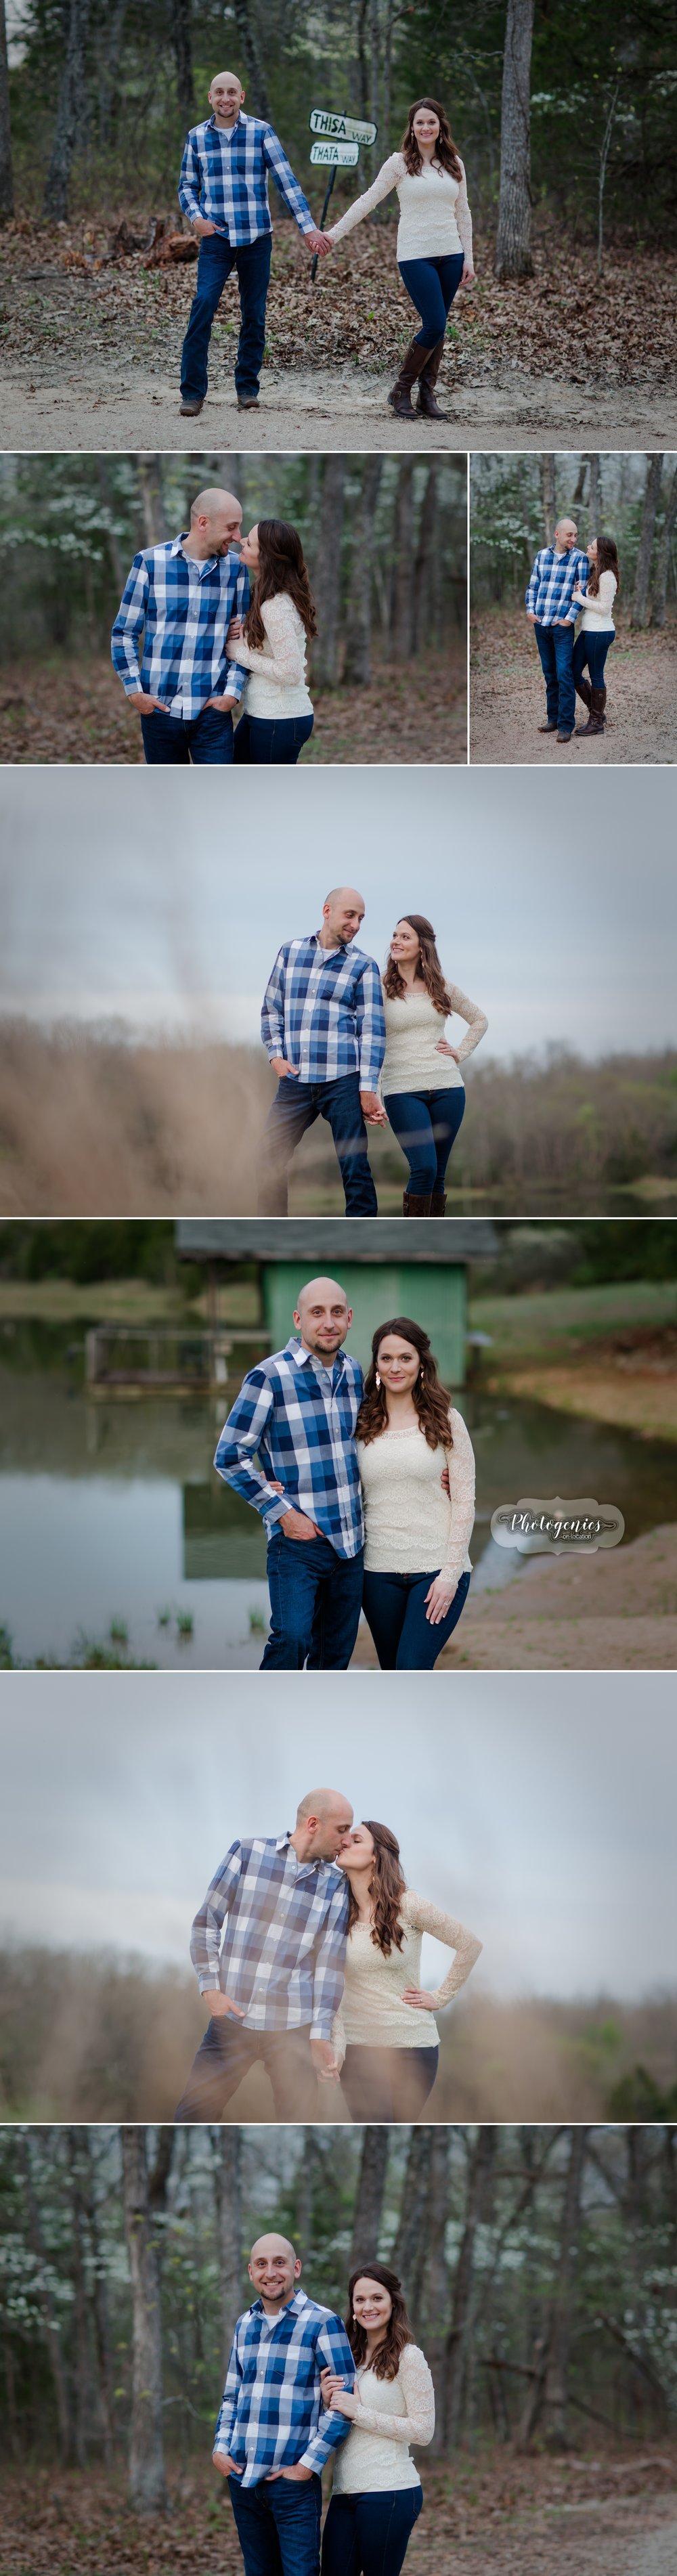  engagement_session_spring_country_creek_water_poses_evening_light_lake_sunset_ideas_simple_variety_unique_couples_photography 